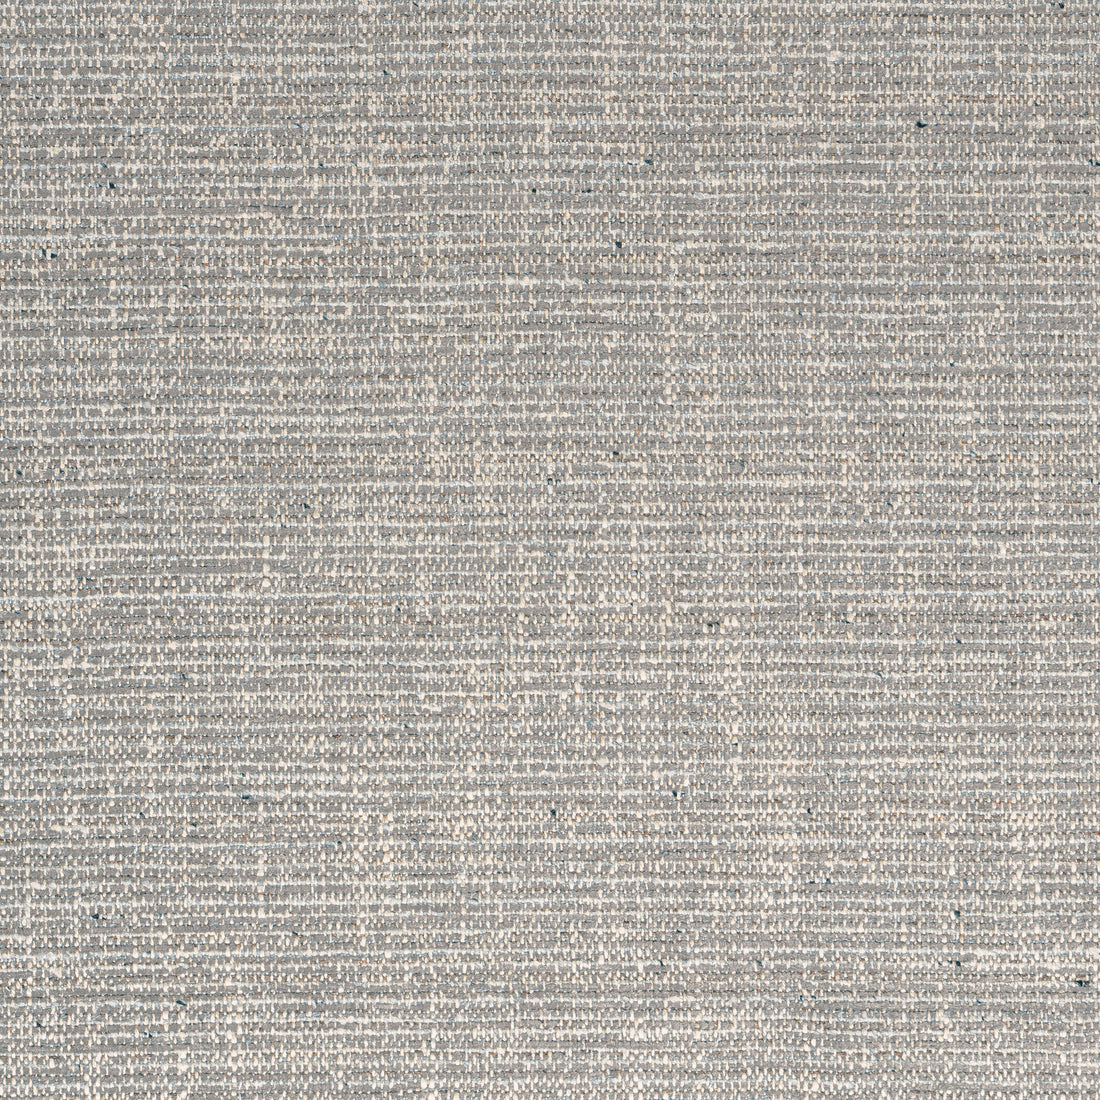 Elgin fabric in mushroom color - pattern number W80938 - by Thibaut in the Dunmore collection